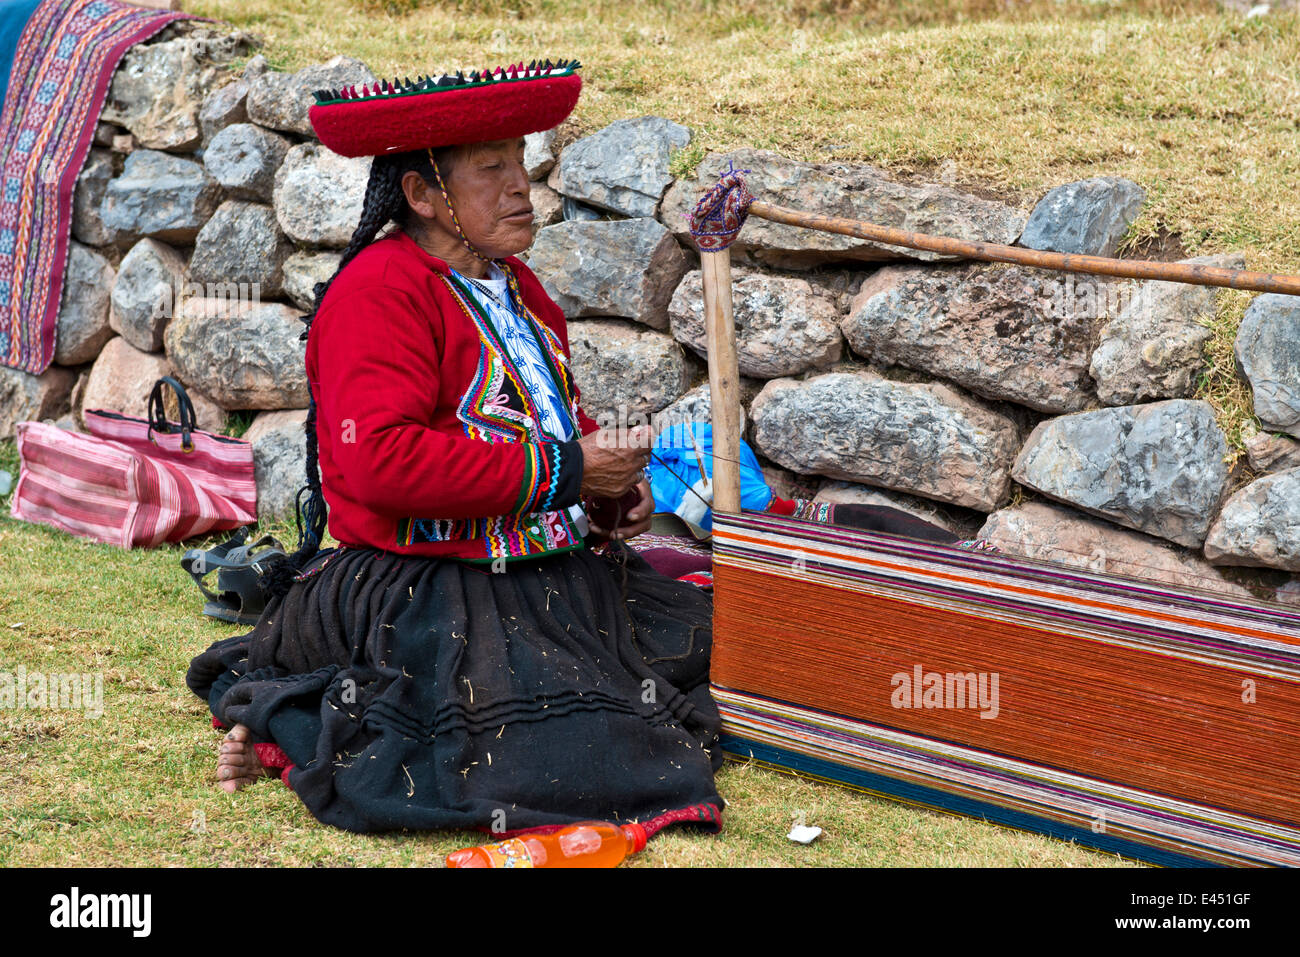 Elderly woman wearing a hat, Quechua Indian in a traditional dress, sitting on the floor and working on a stretcher of a loom Stock Photo